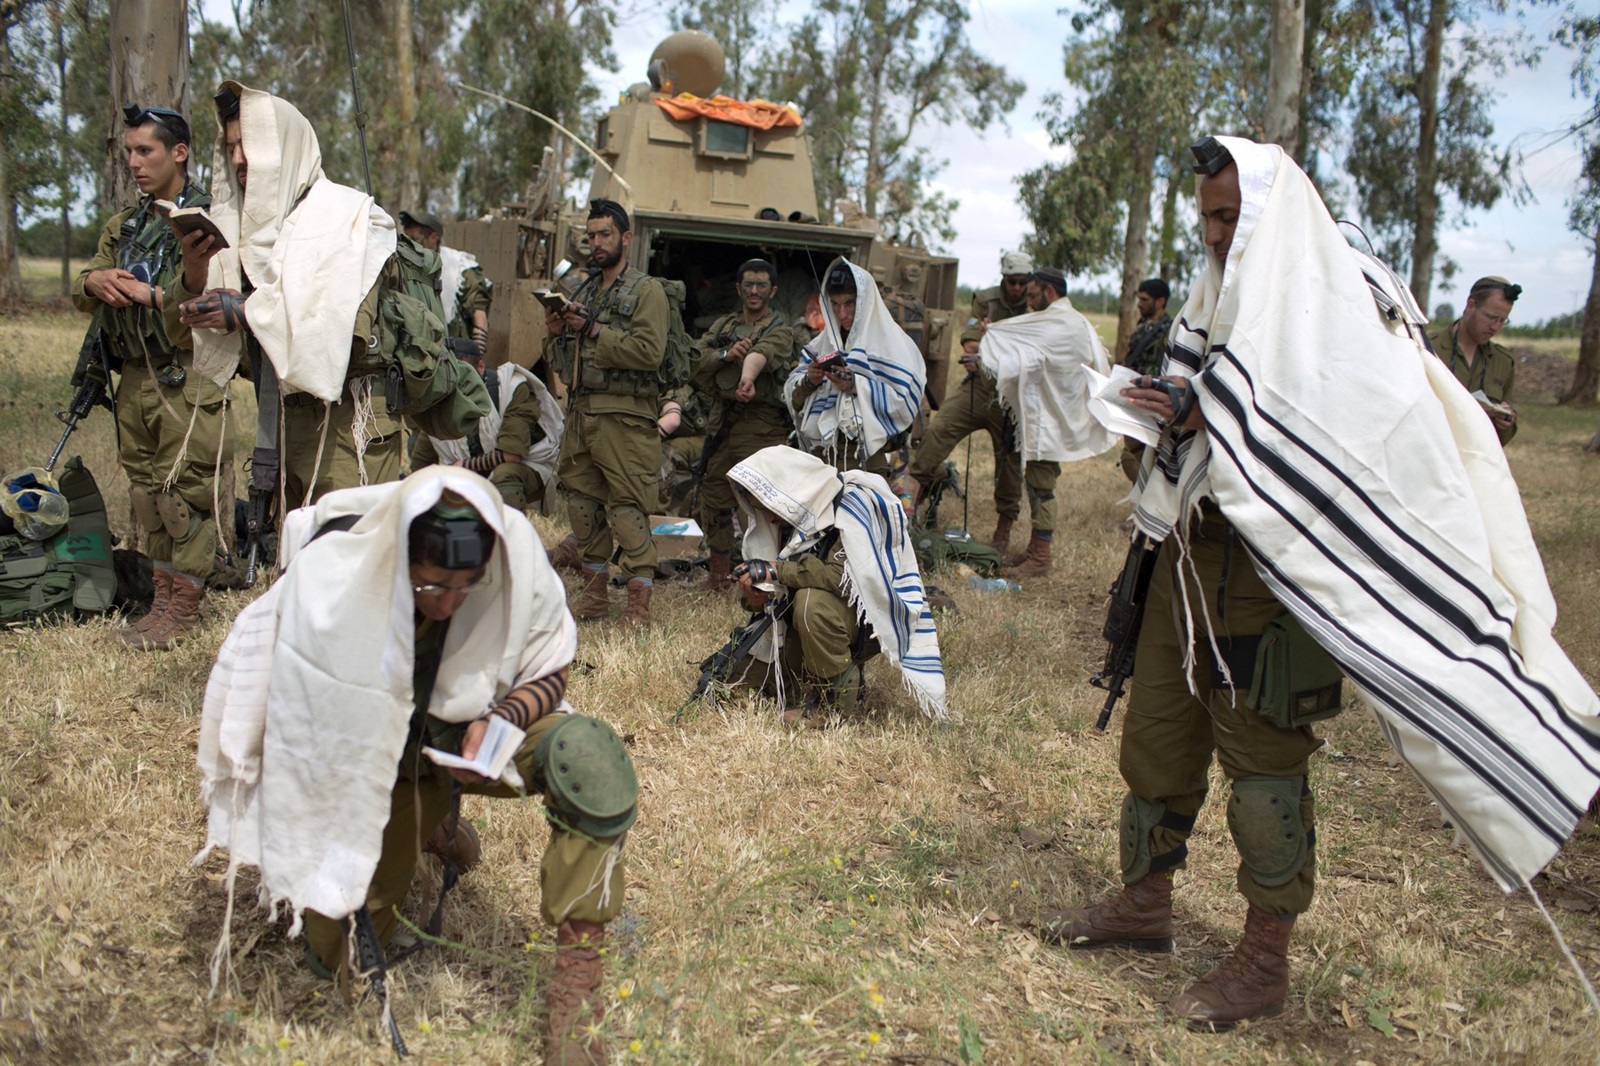 Israeli soldiers of the Jewish Ultra-Orthodox battalion "Netzah Yehuda" hold morning prayers as they take part in their annual unit training in the Israeli annexed Golan Heights, near the Syrian border on May 19, 2014. The Netzah Yehuda Battalion is a battalion in the Kfir Brigade of the Israel military which was created  to allow religious Israelis to serve in the army  in an atmosphere respecting their religious convictions.,Image: 194044789, License: Rights-managed, Restrictions: , Model Release: no, Credit line: MENAHEM KAHANA / AFP / Profimedia